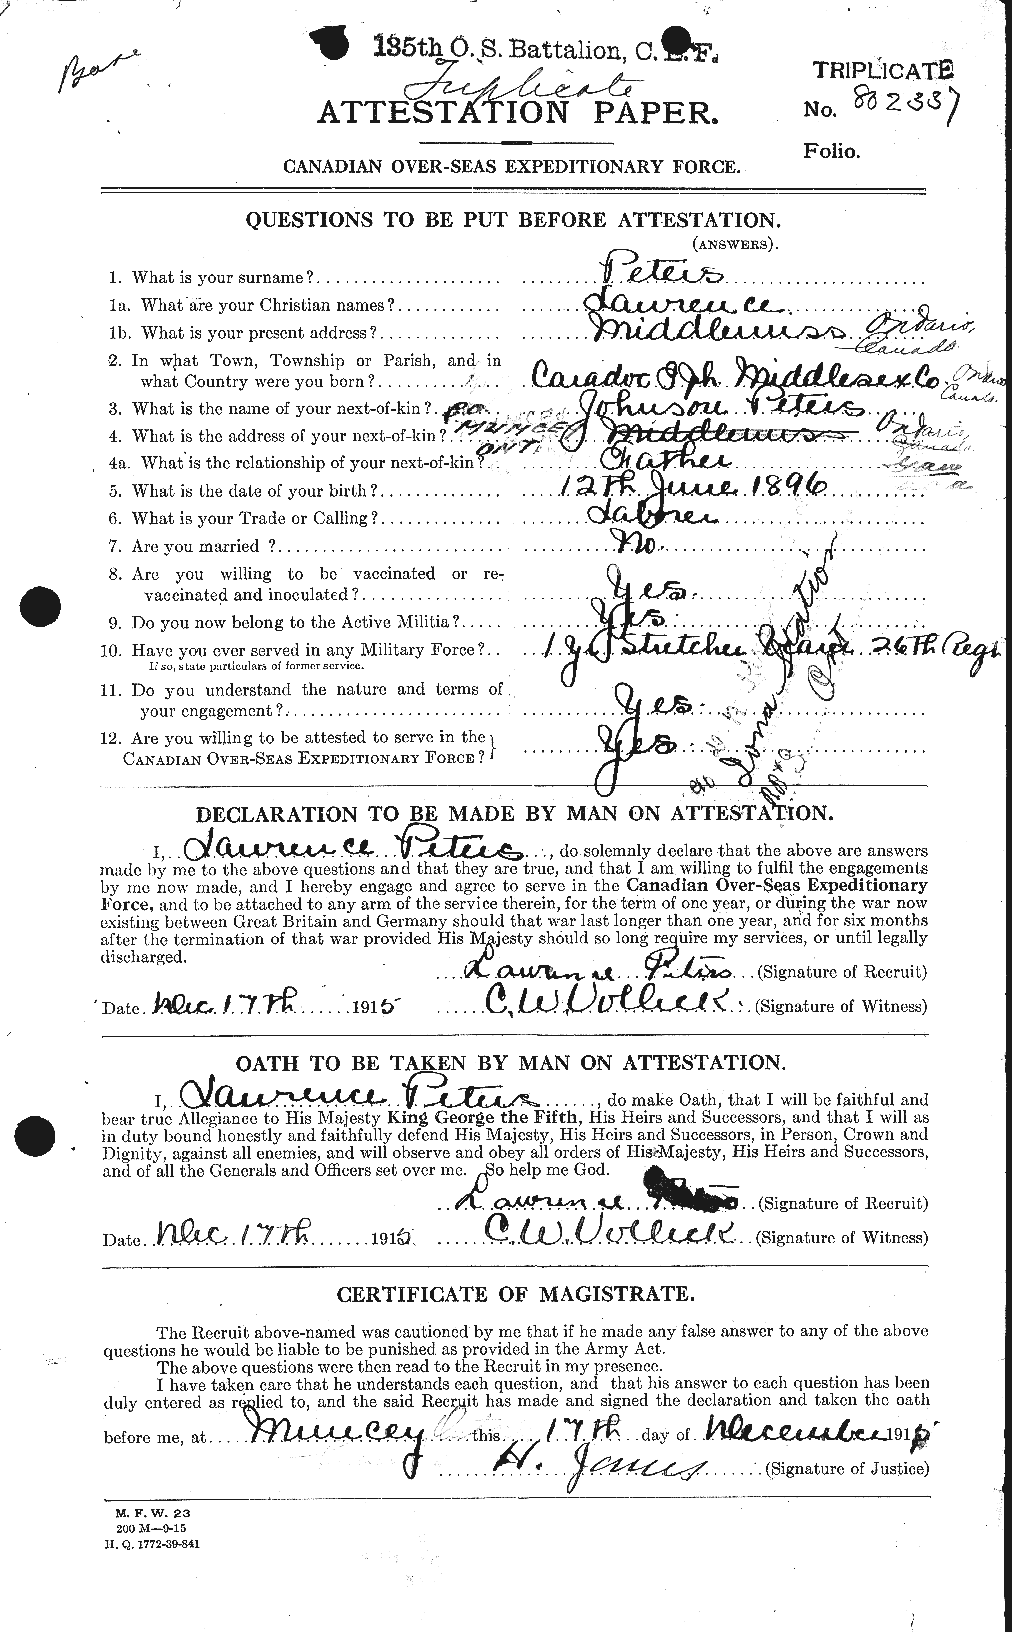 Personnel Records of the First World War - CEF 575569a